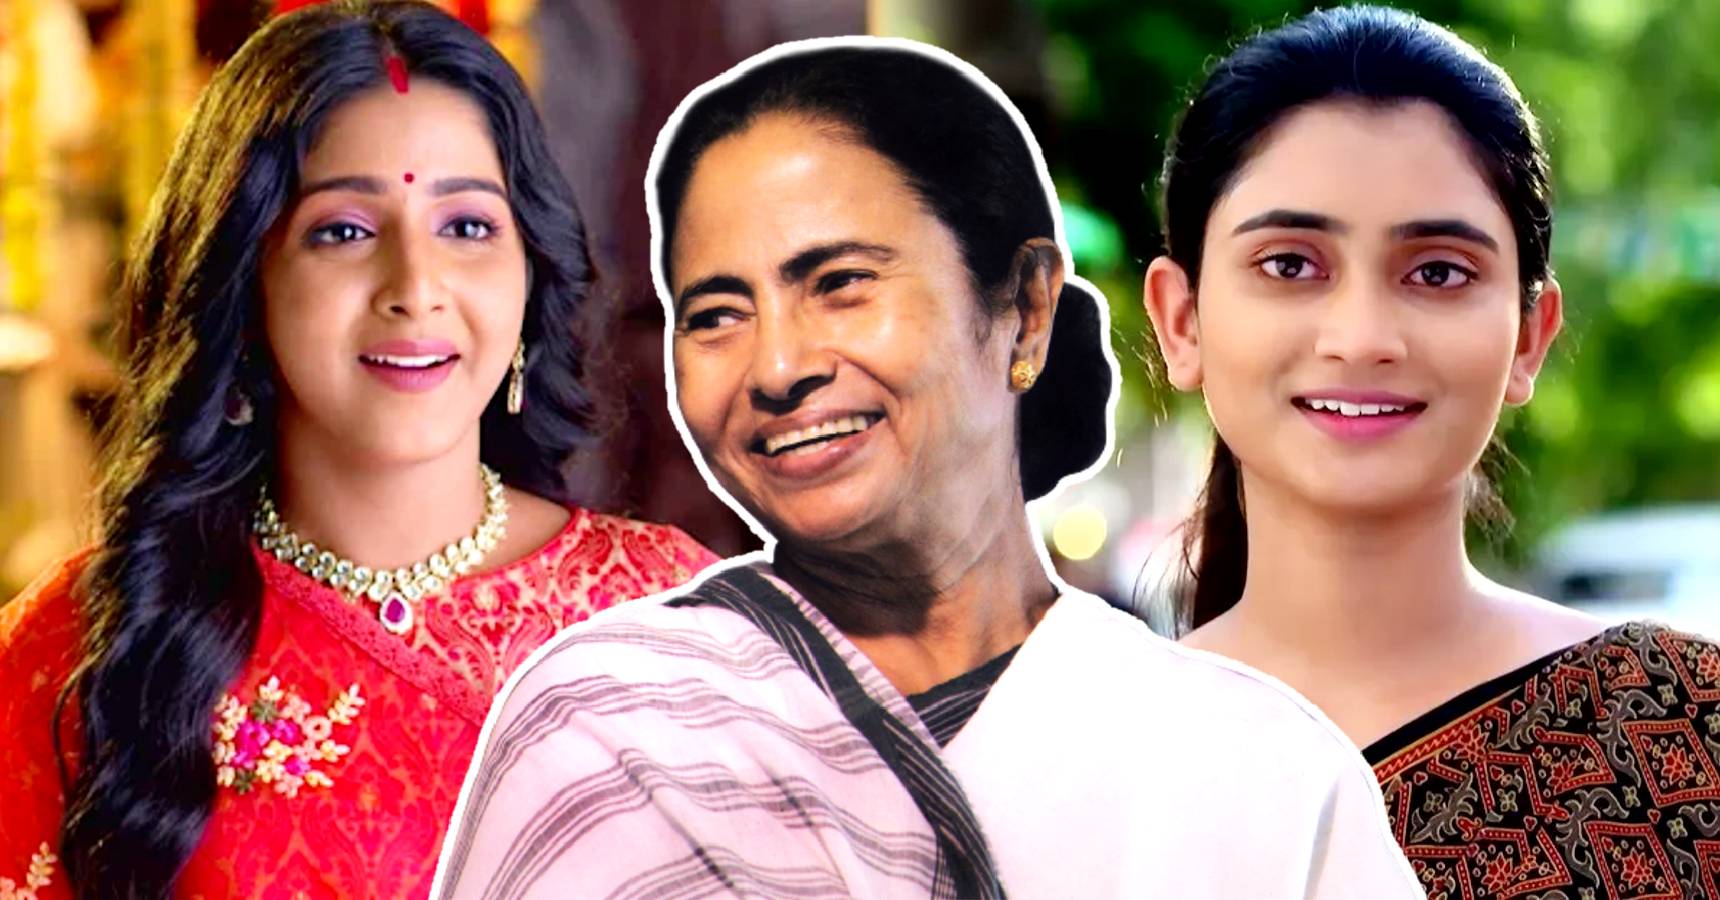 Chief Minister Mamata Banerjee opens up about her favourite Bengali serial